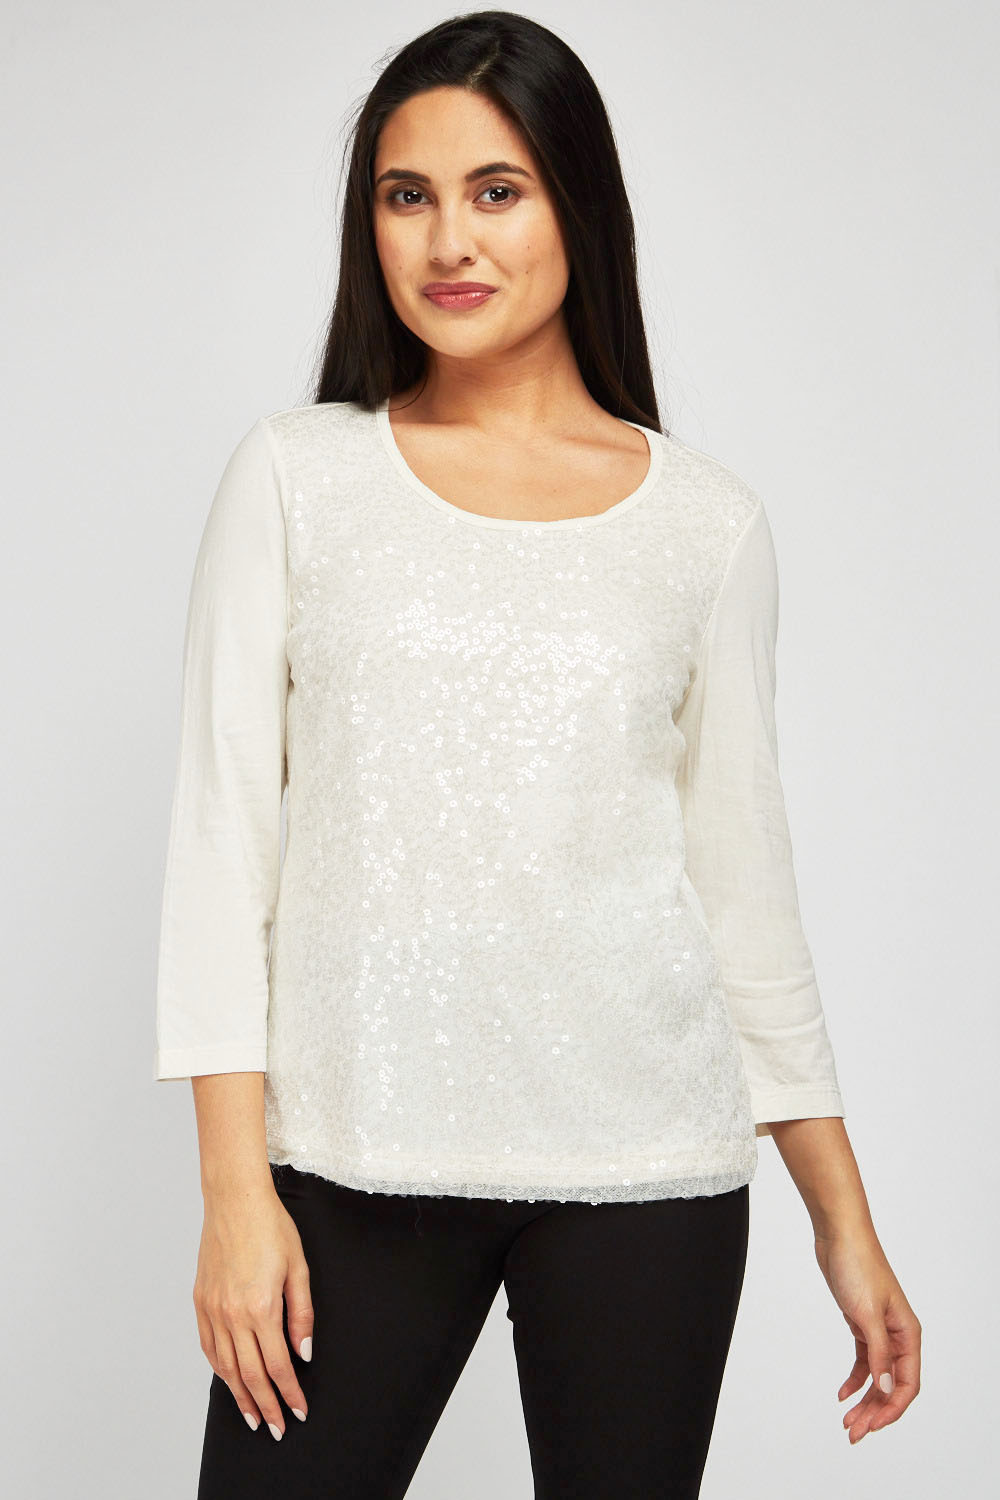 Sequin Mesh Overlay Basic Top - Just $3